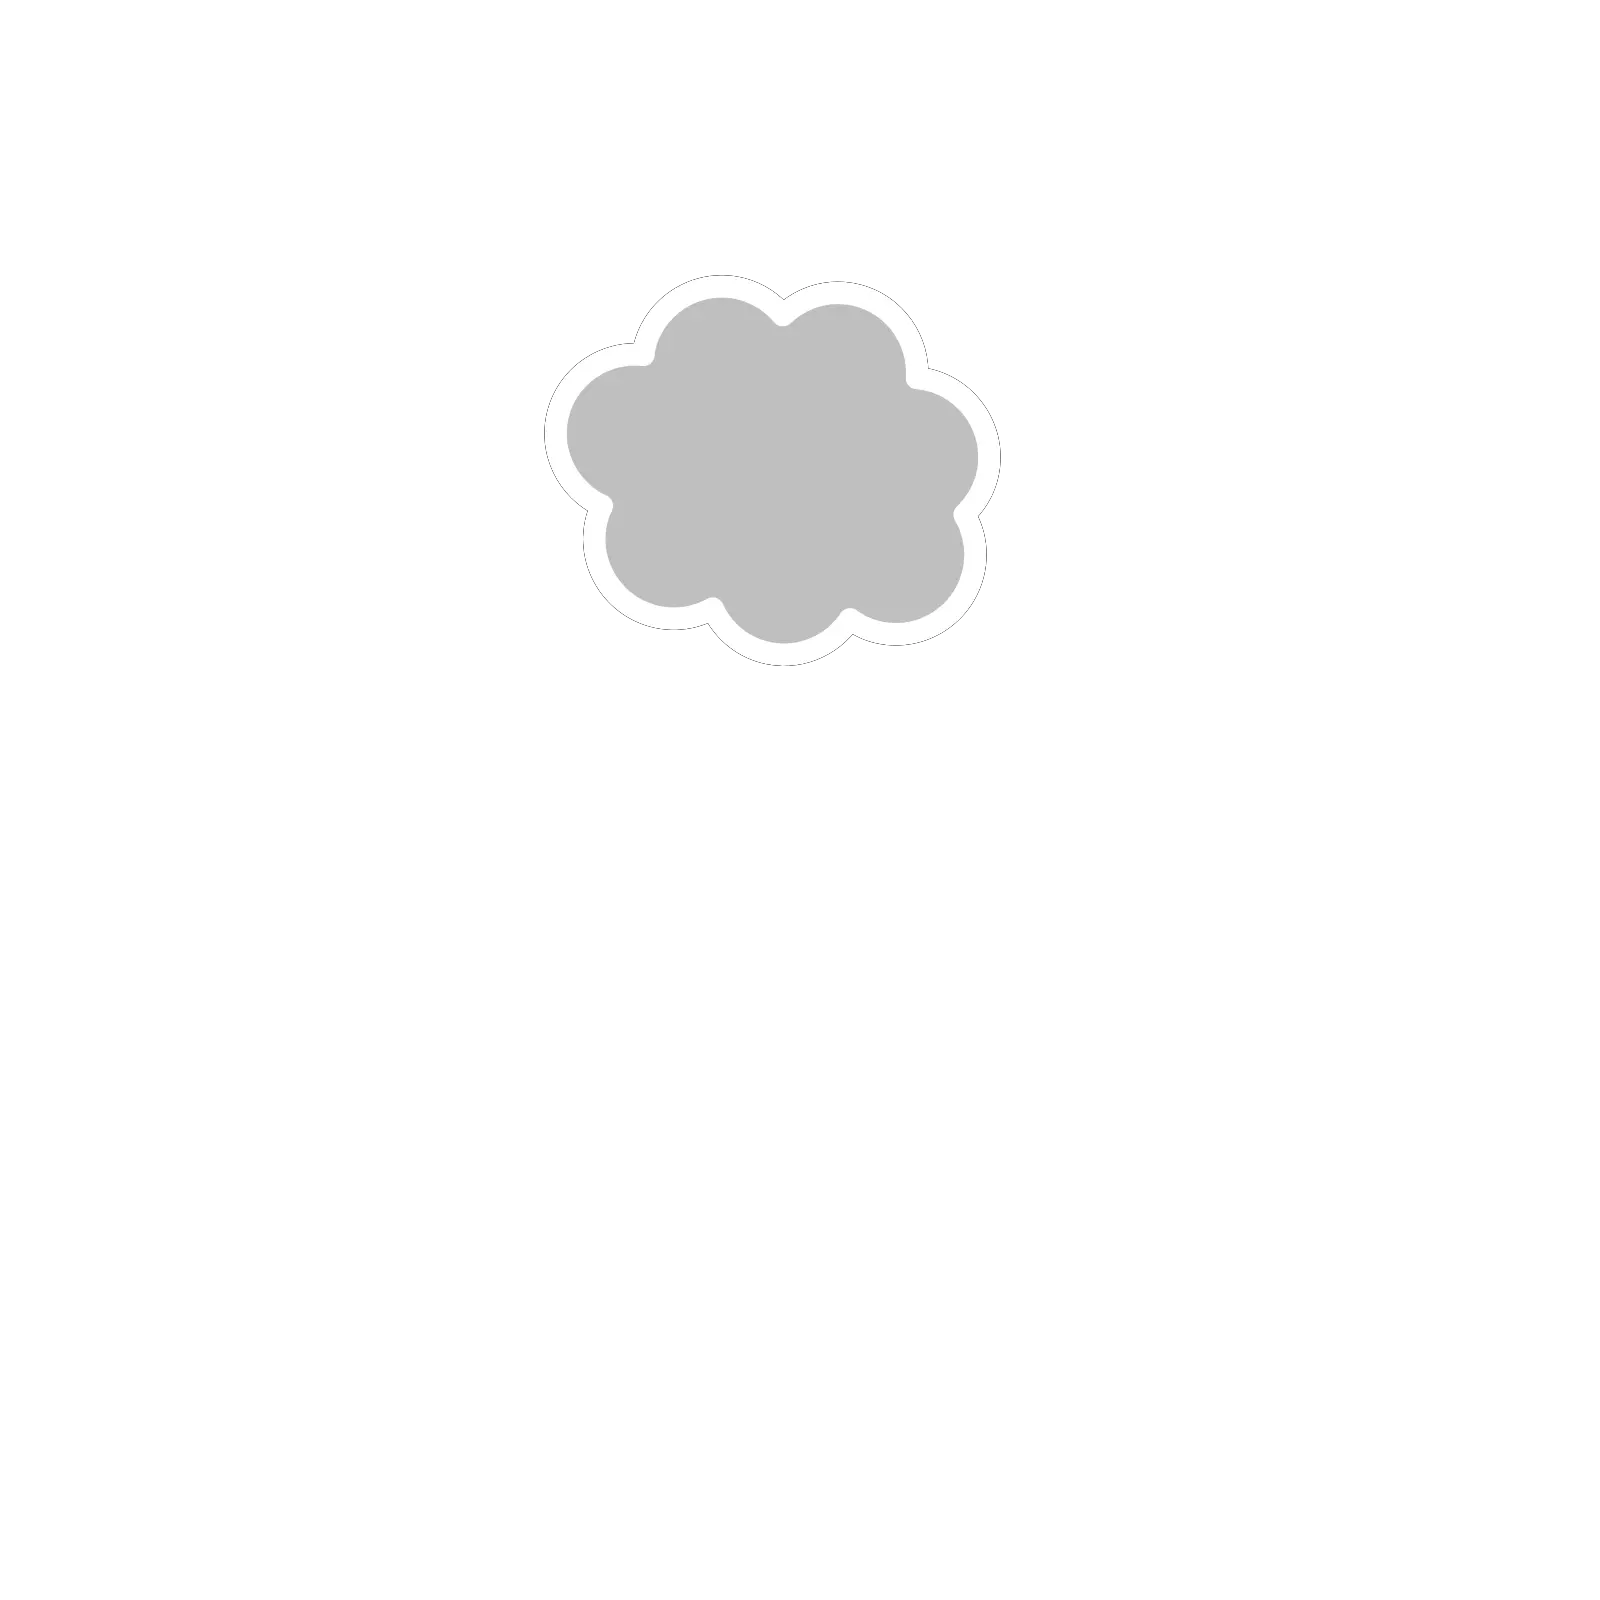 Download How To Set Use Cloud Icon White Border Clipart Png White Outline Cloud Icon White Border Png